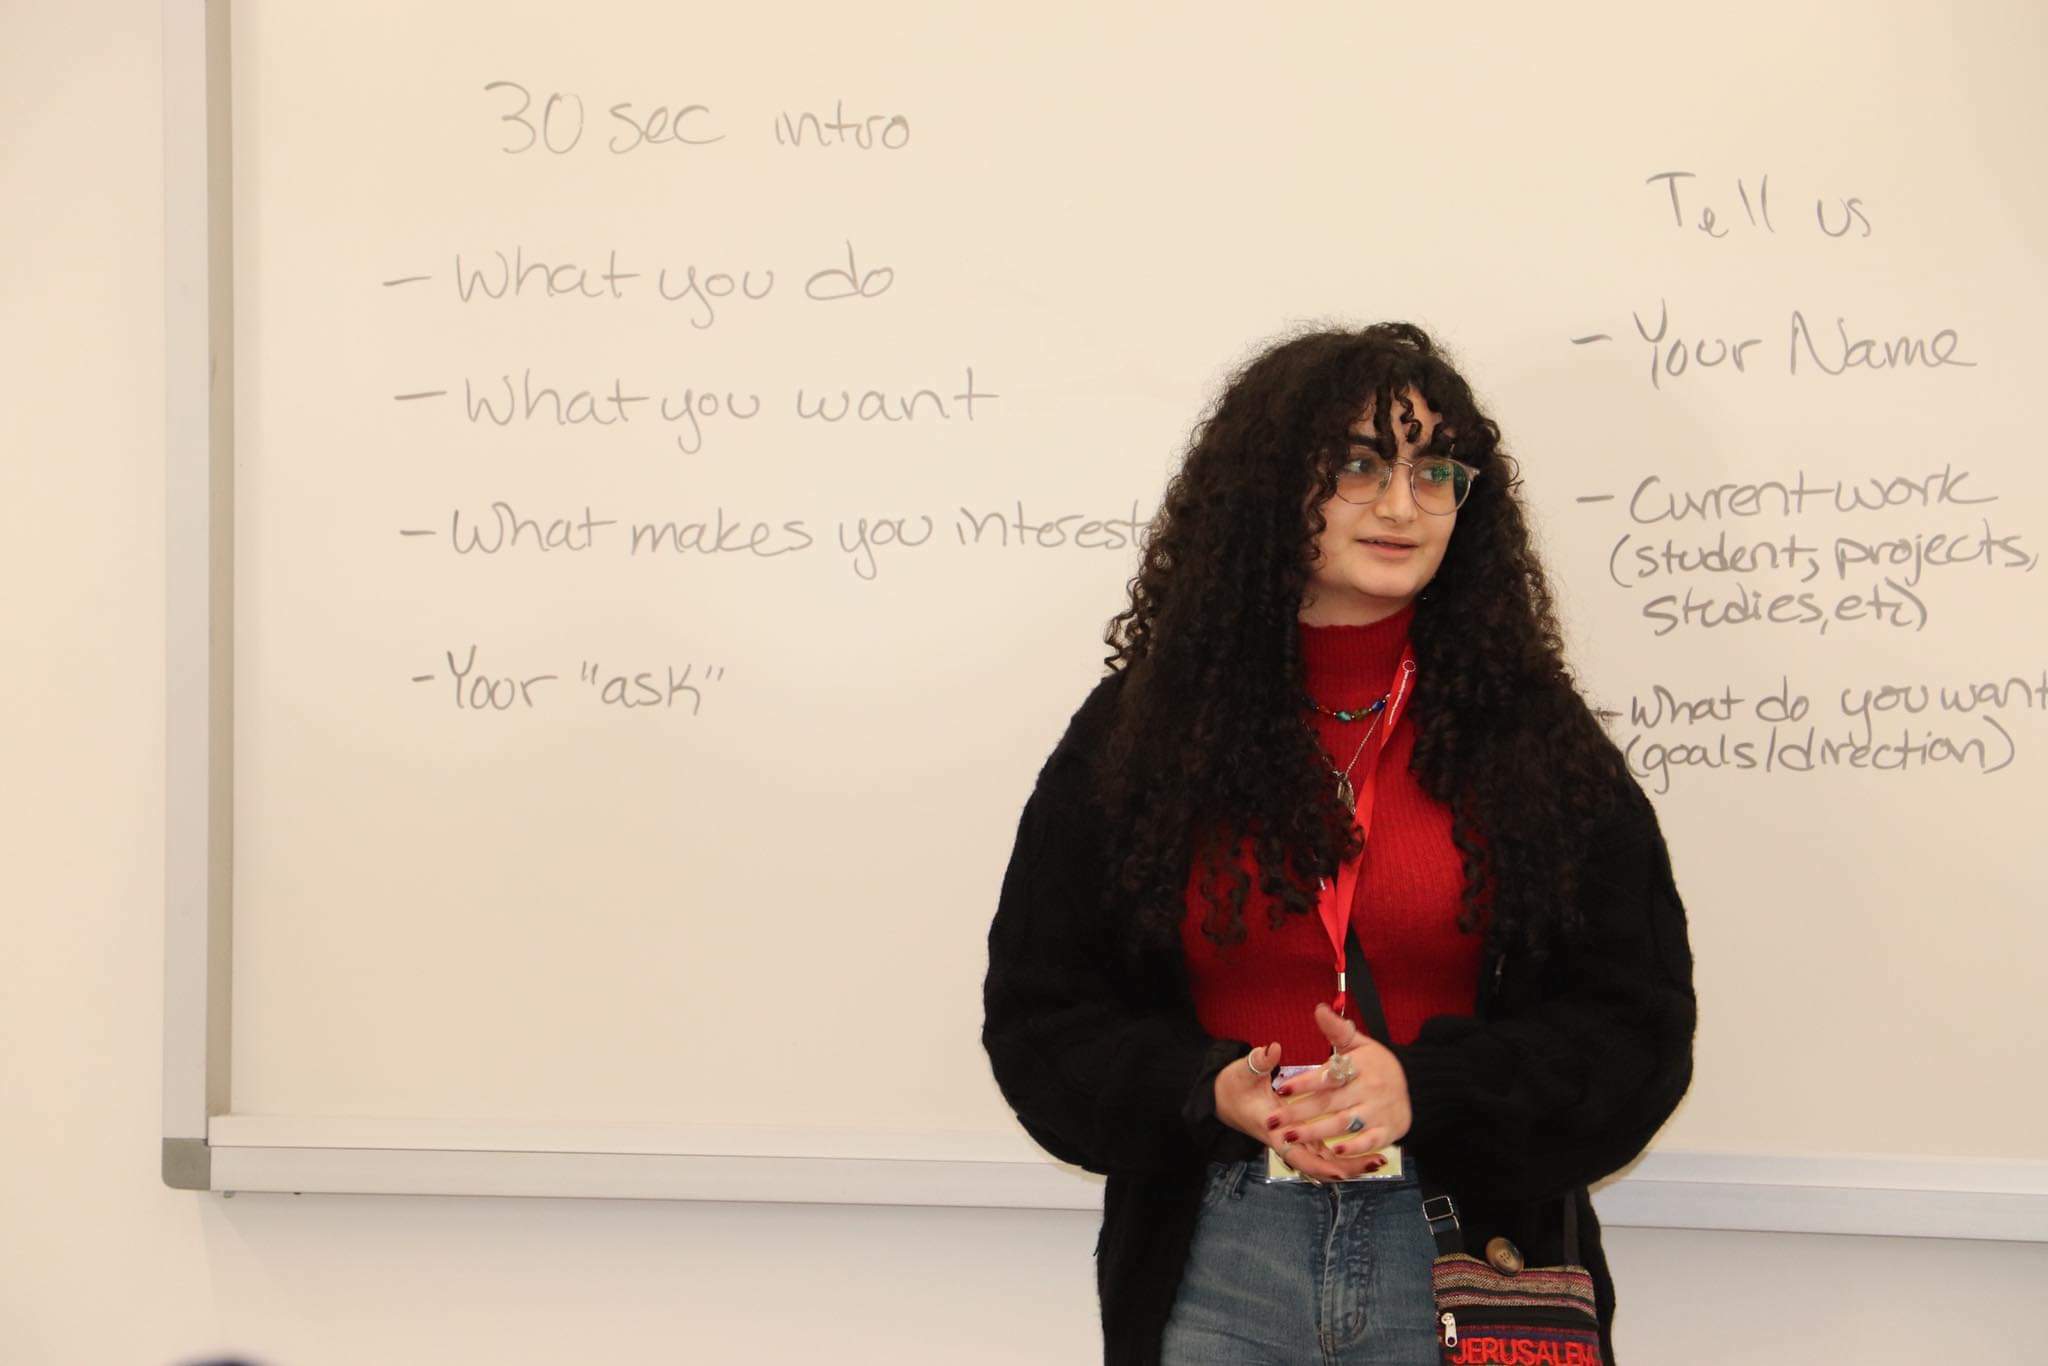 Dareen standing in front of a whiteboard